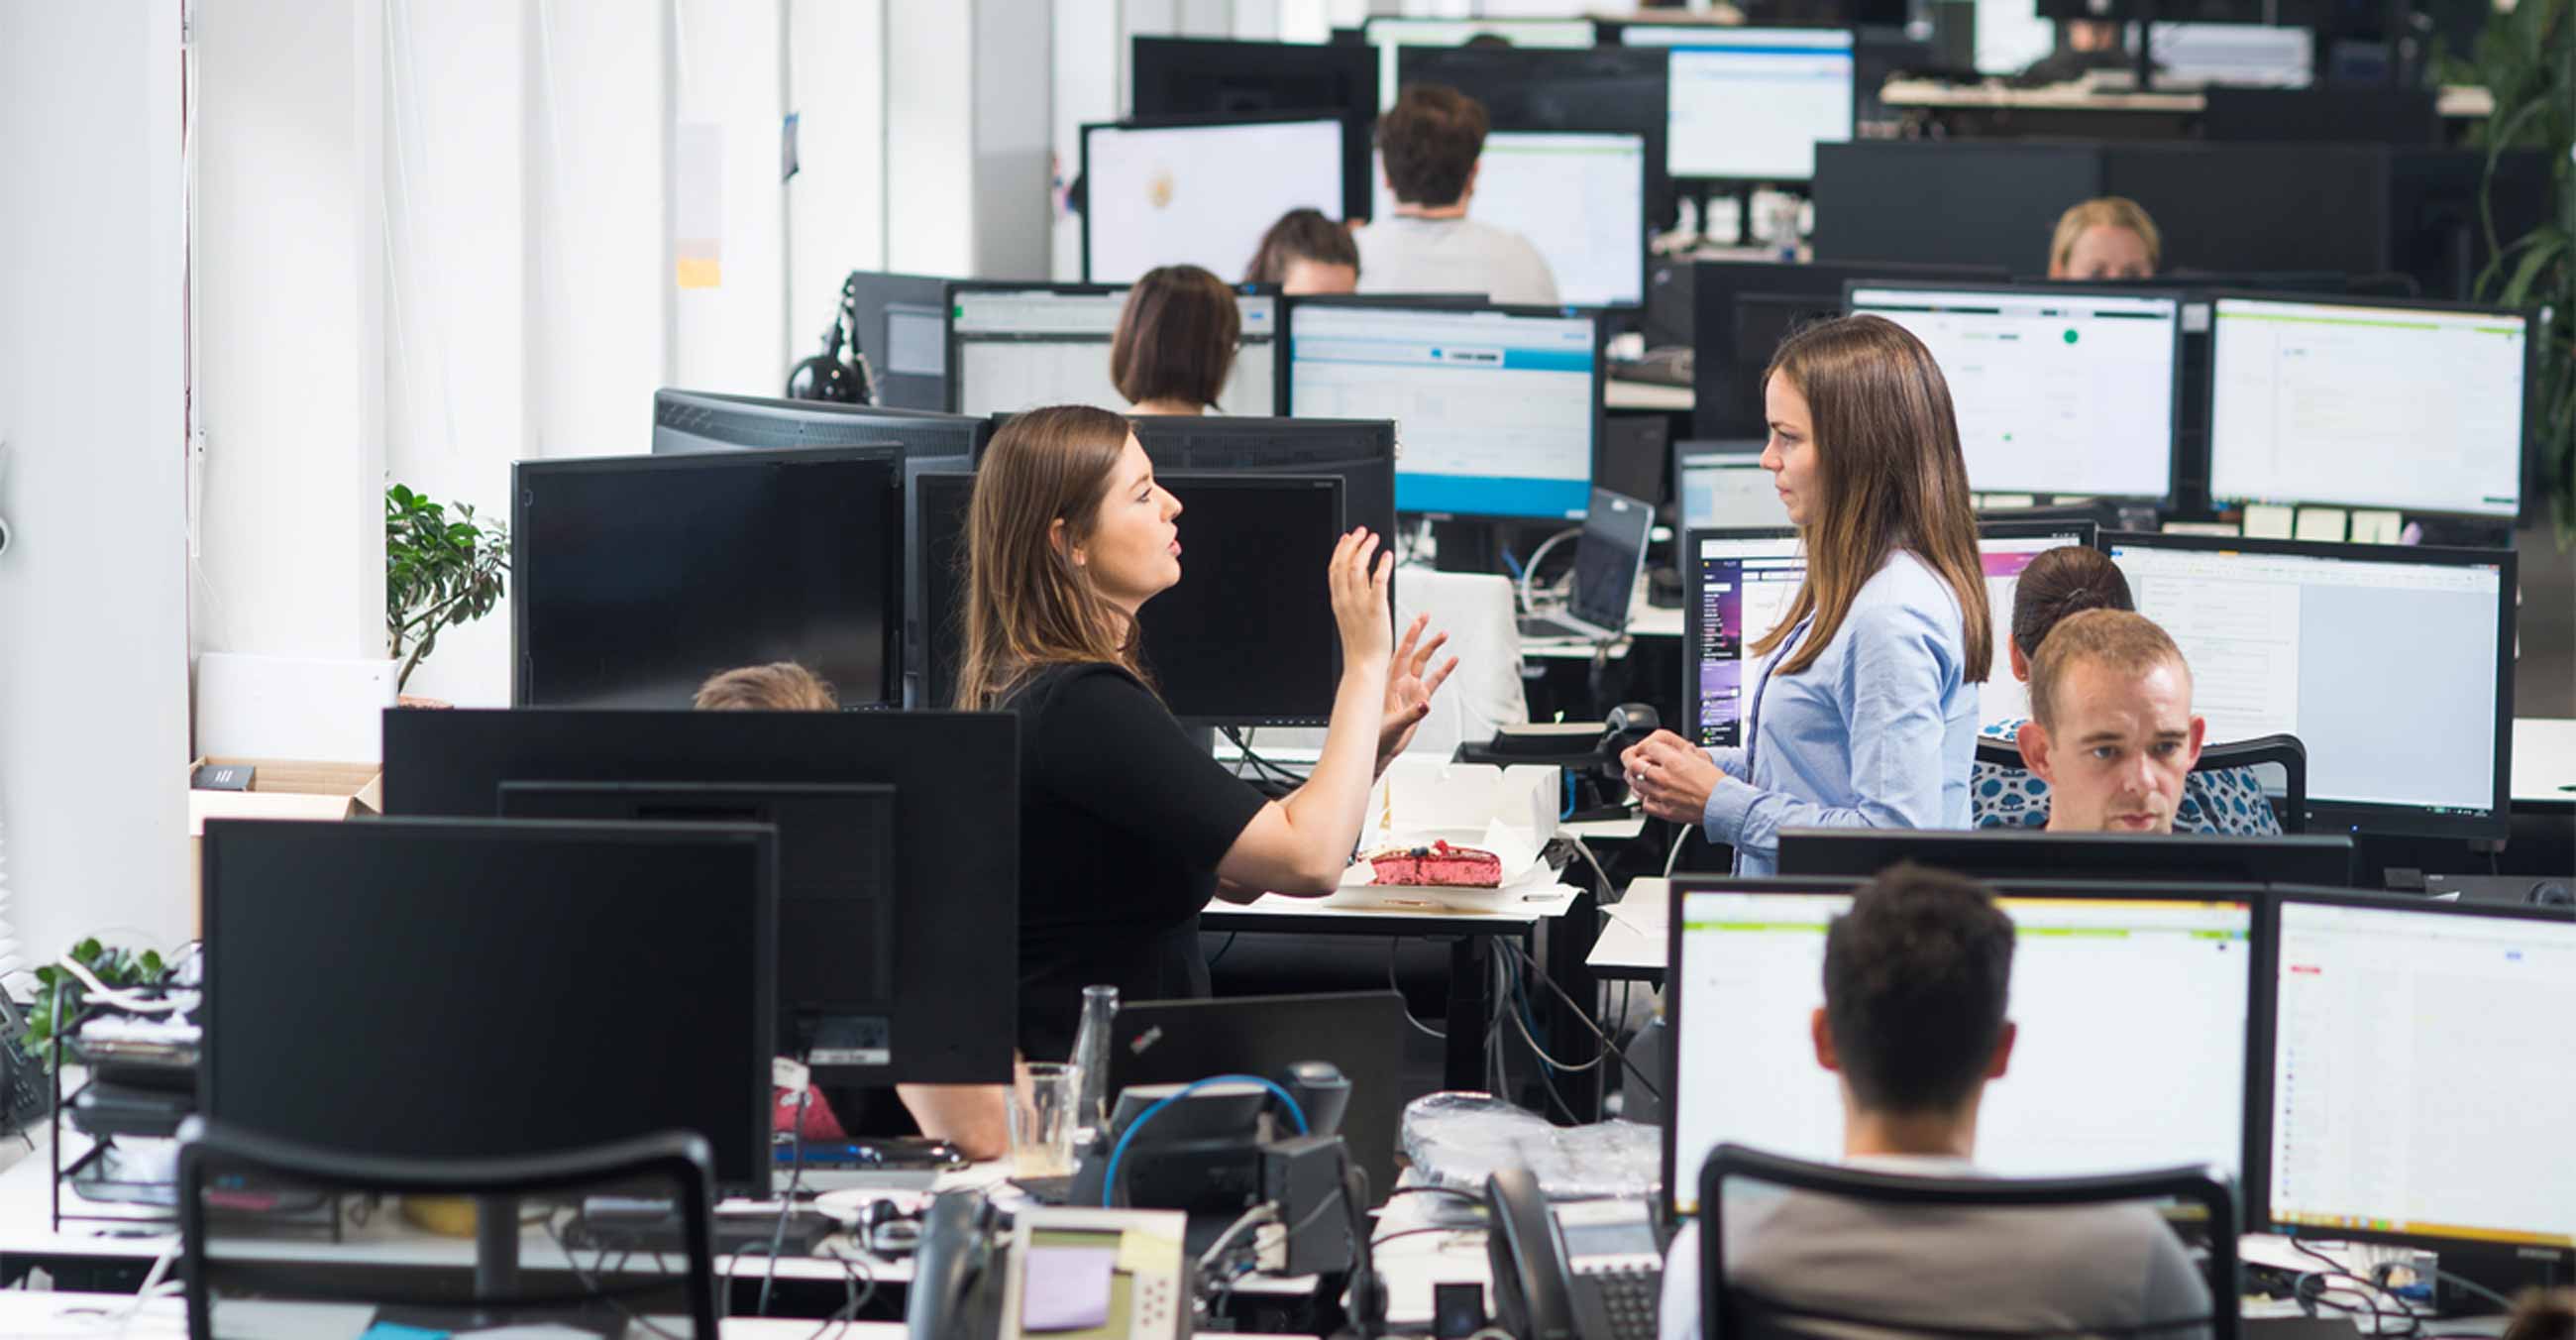 A photograph of two employees engaged in conversation in the midst of desks in Trustpilot's office.